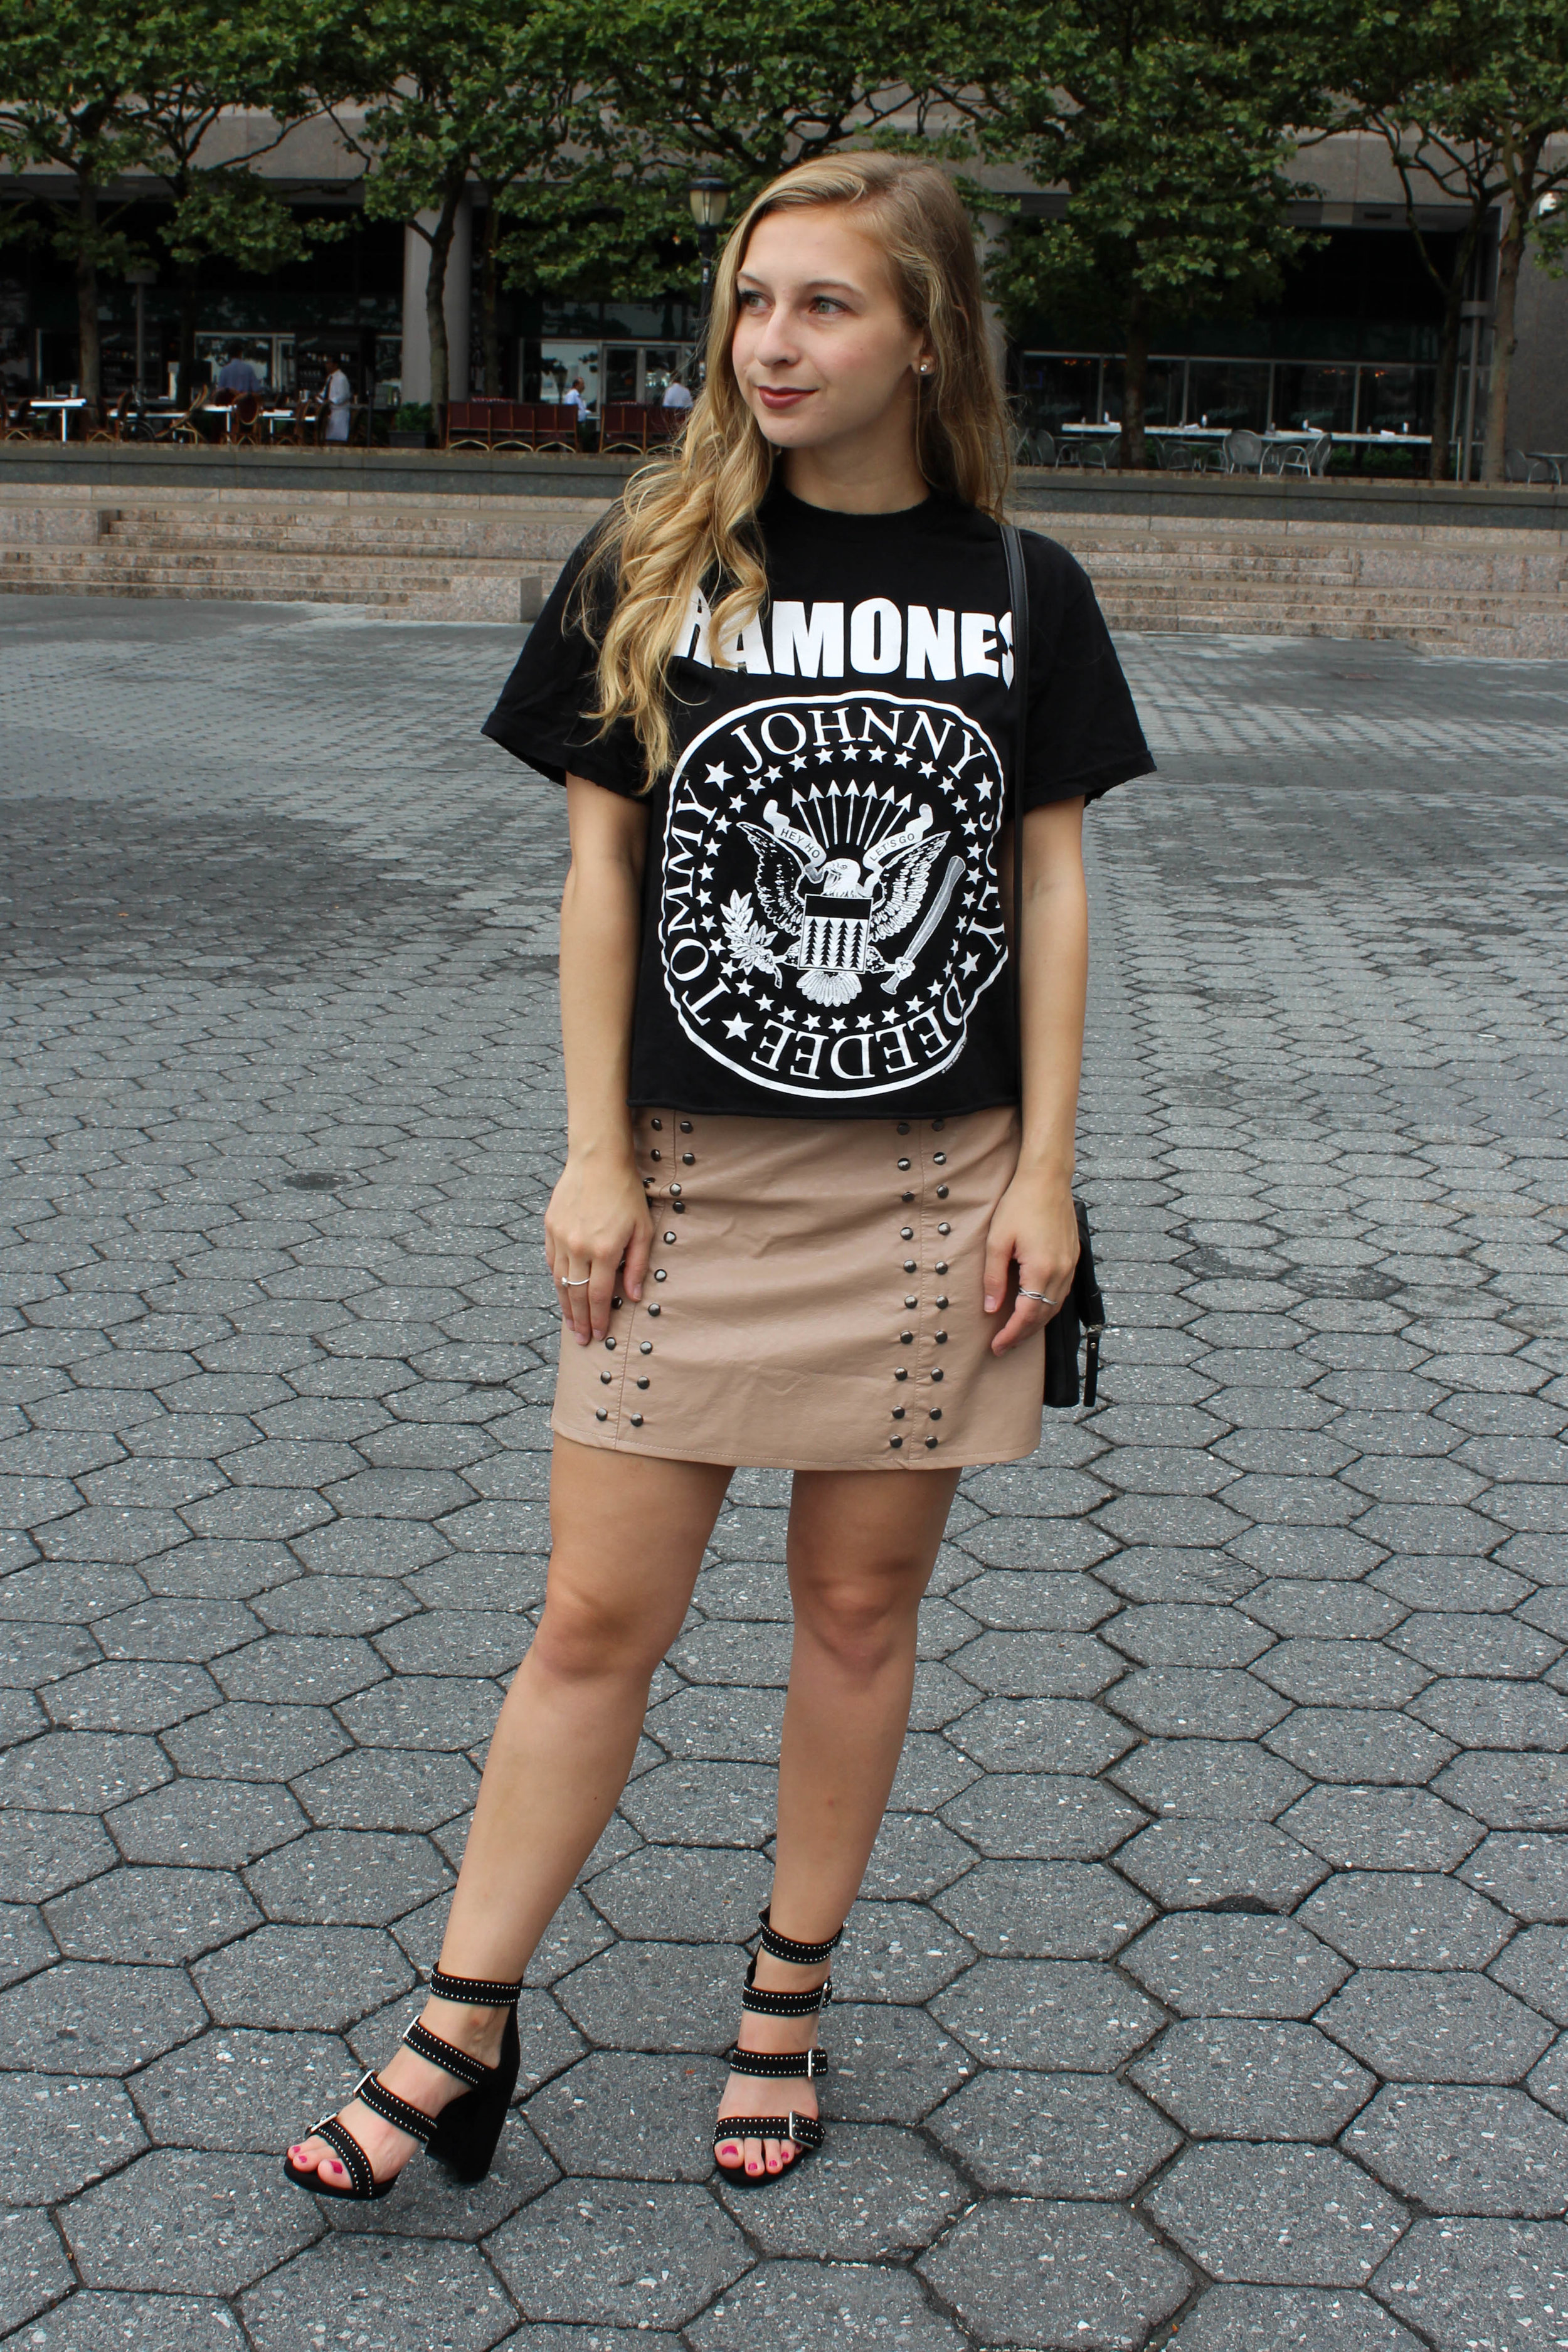 The Perfect Pair: Graphic Tees and Skirts - Fashion & Fernweh